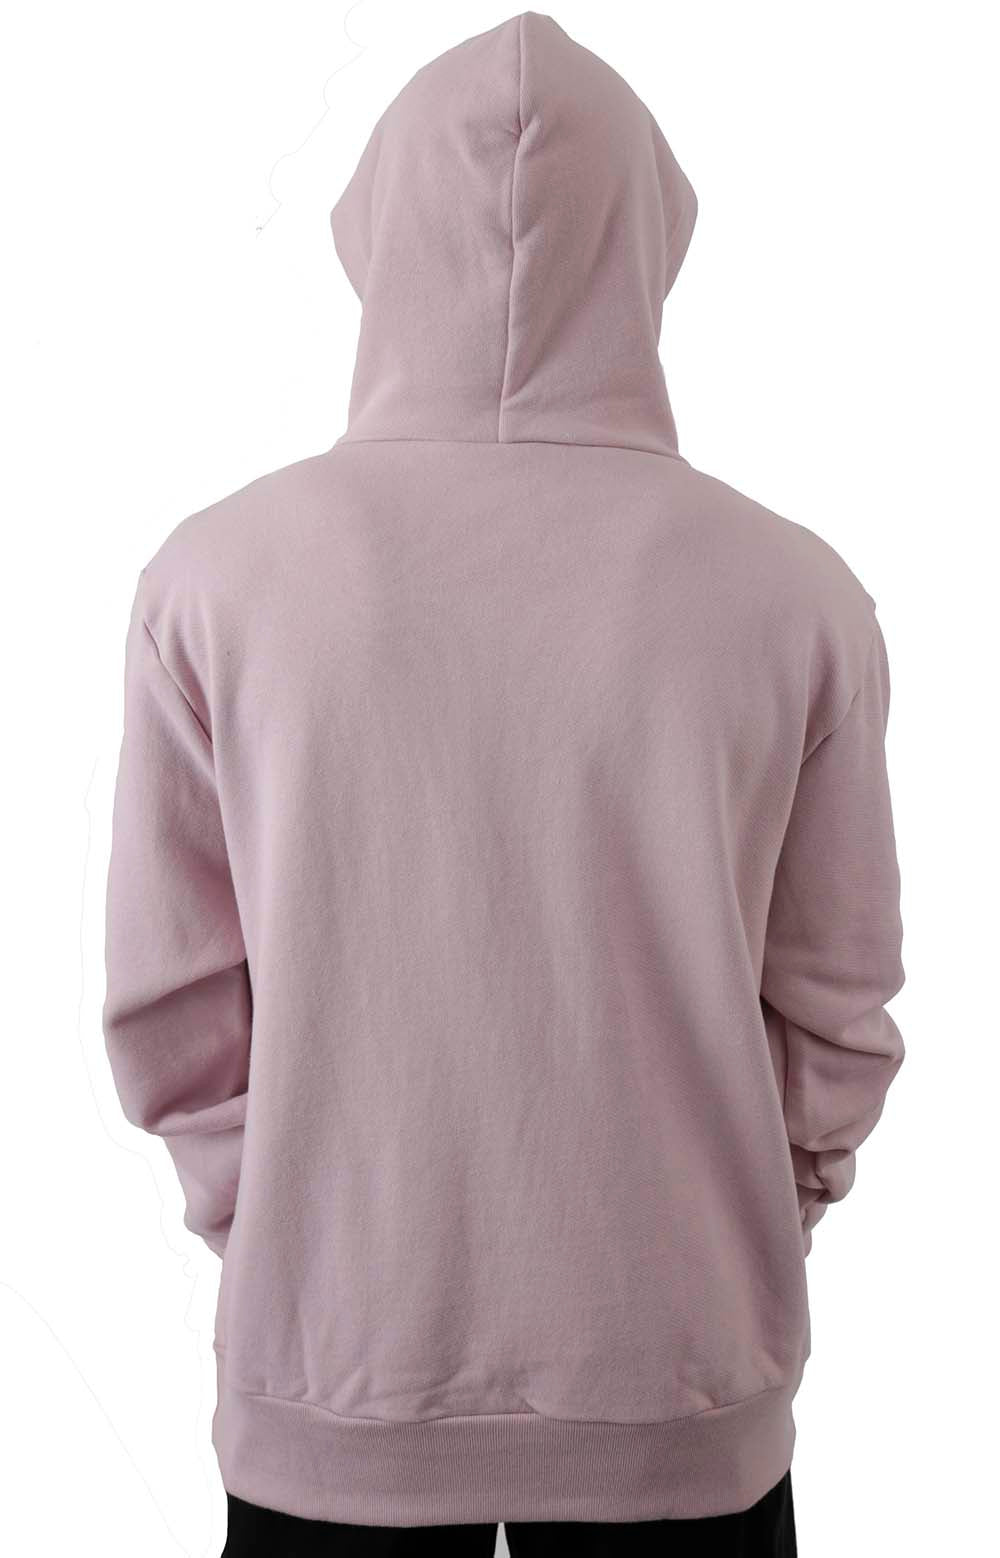 Home Team Pullover Hoodie - Mauve